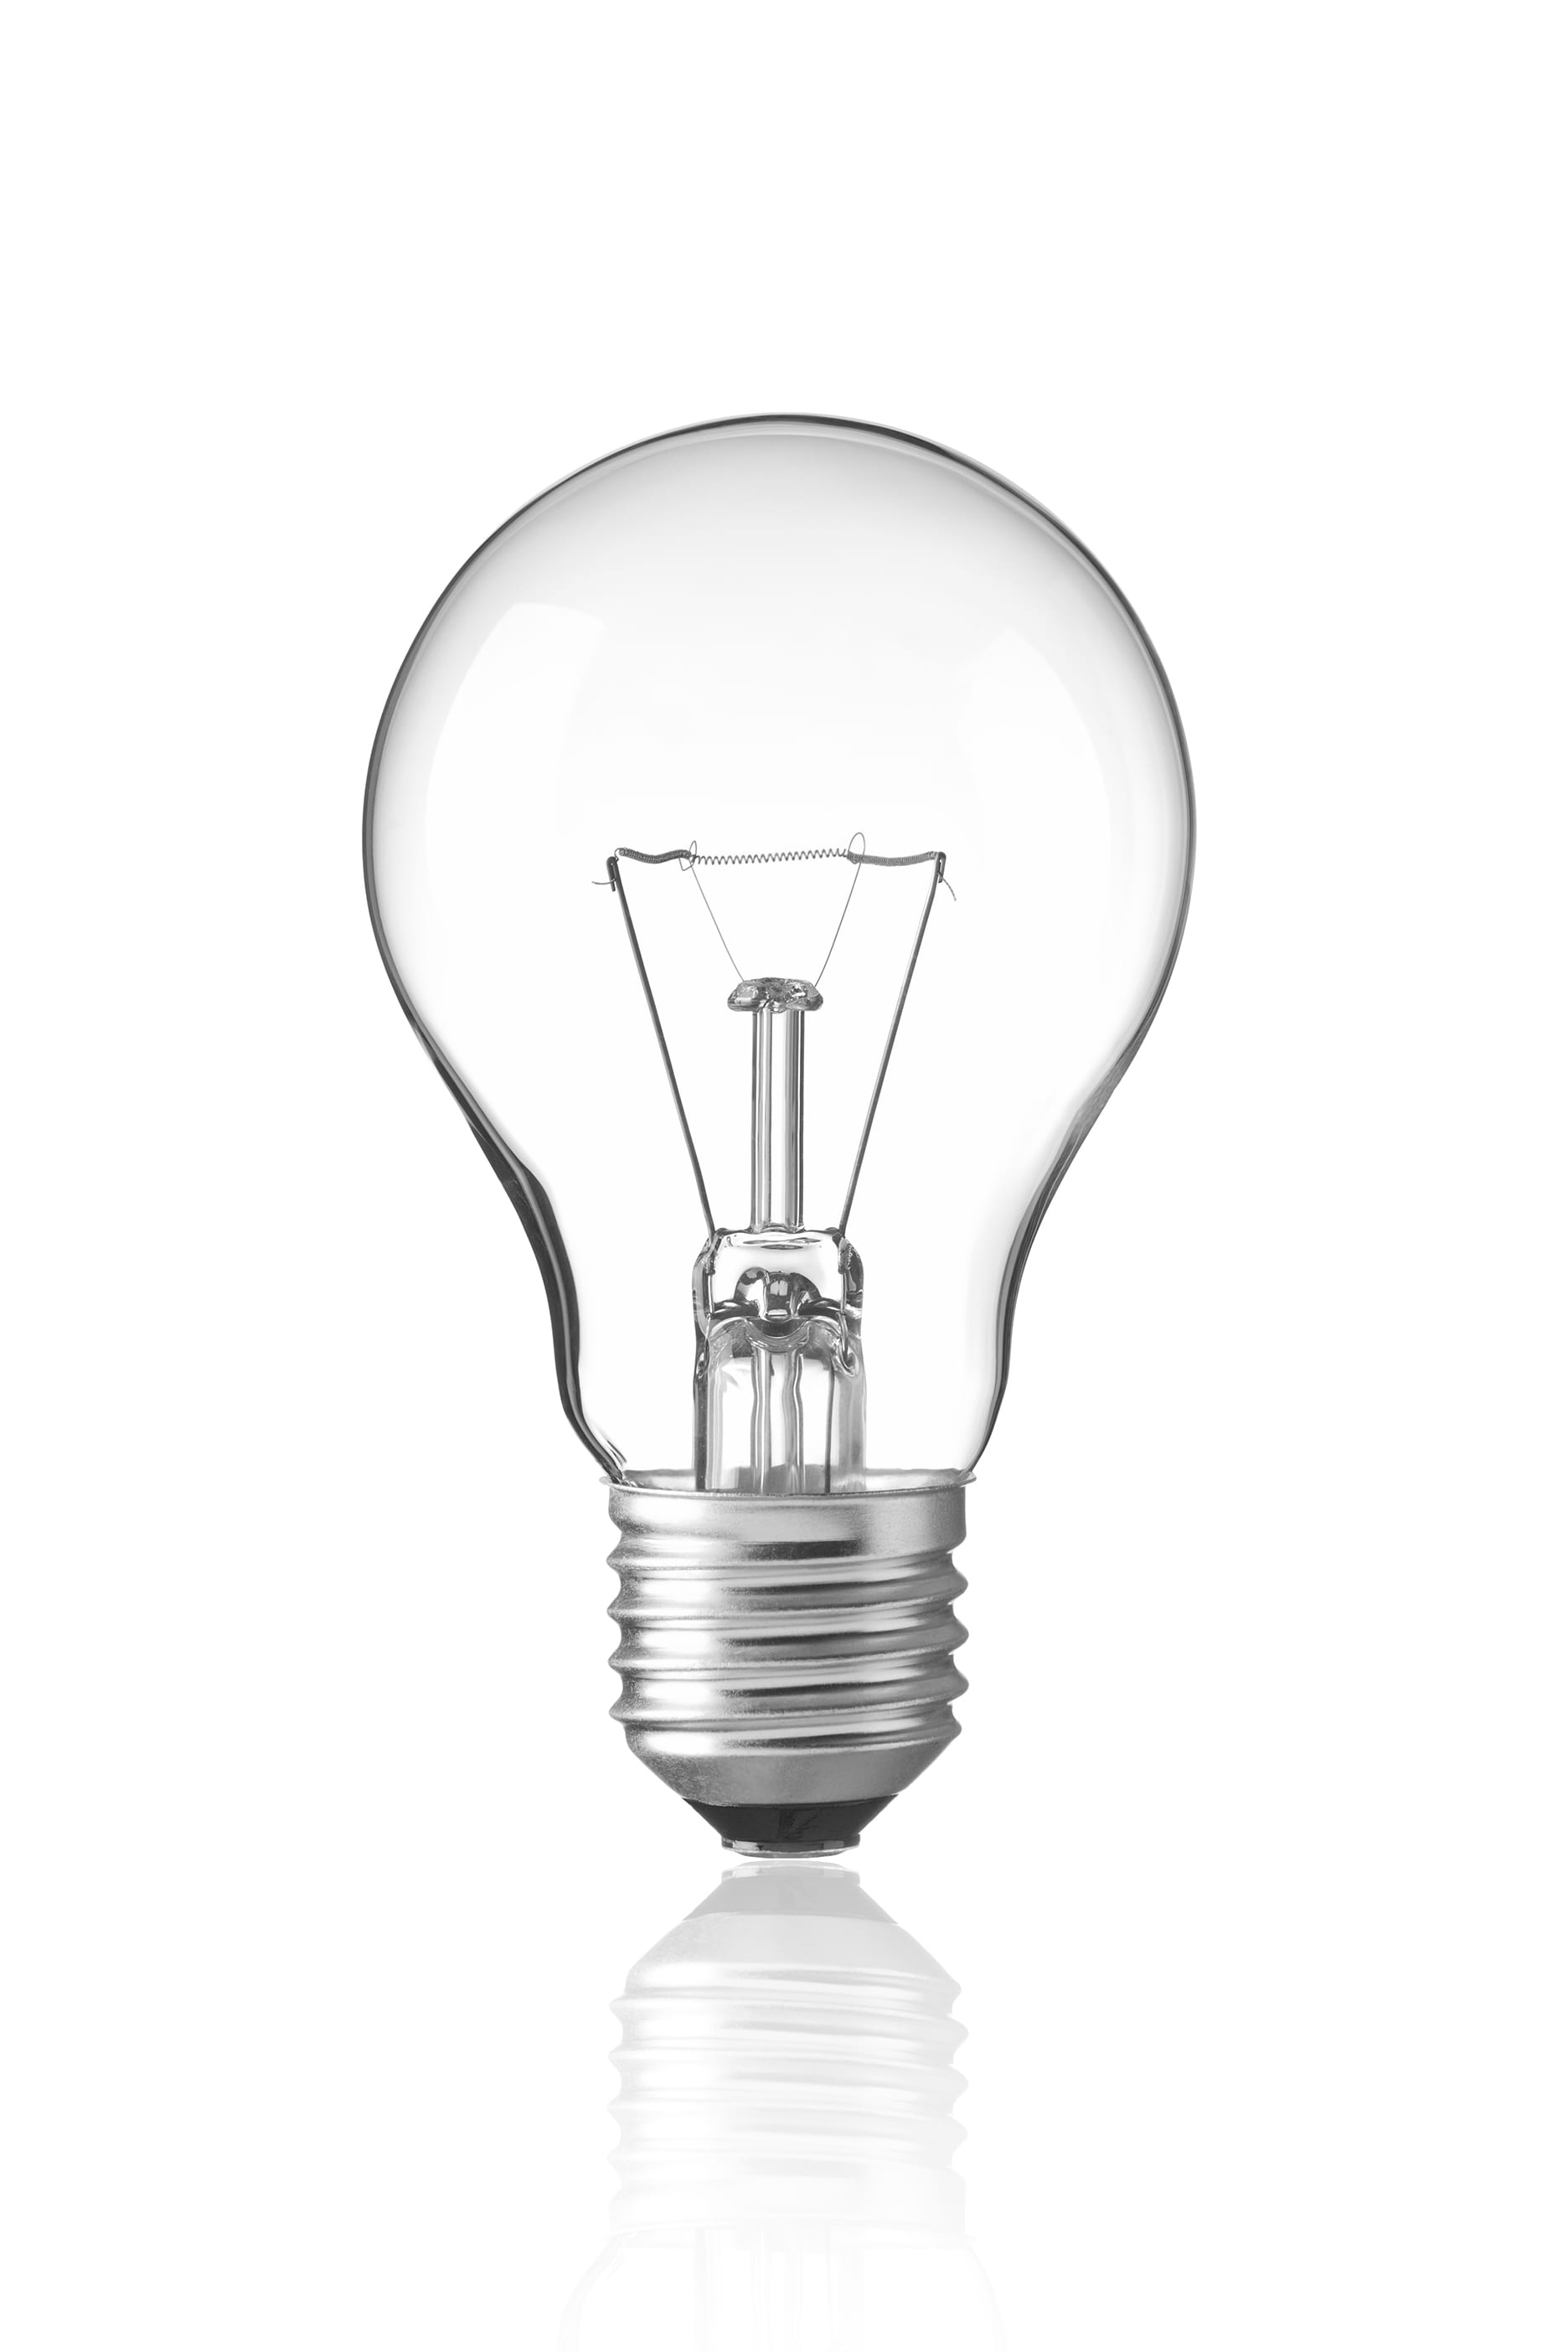 A single clear lightbulb on a white background